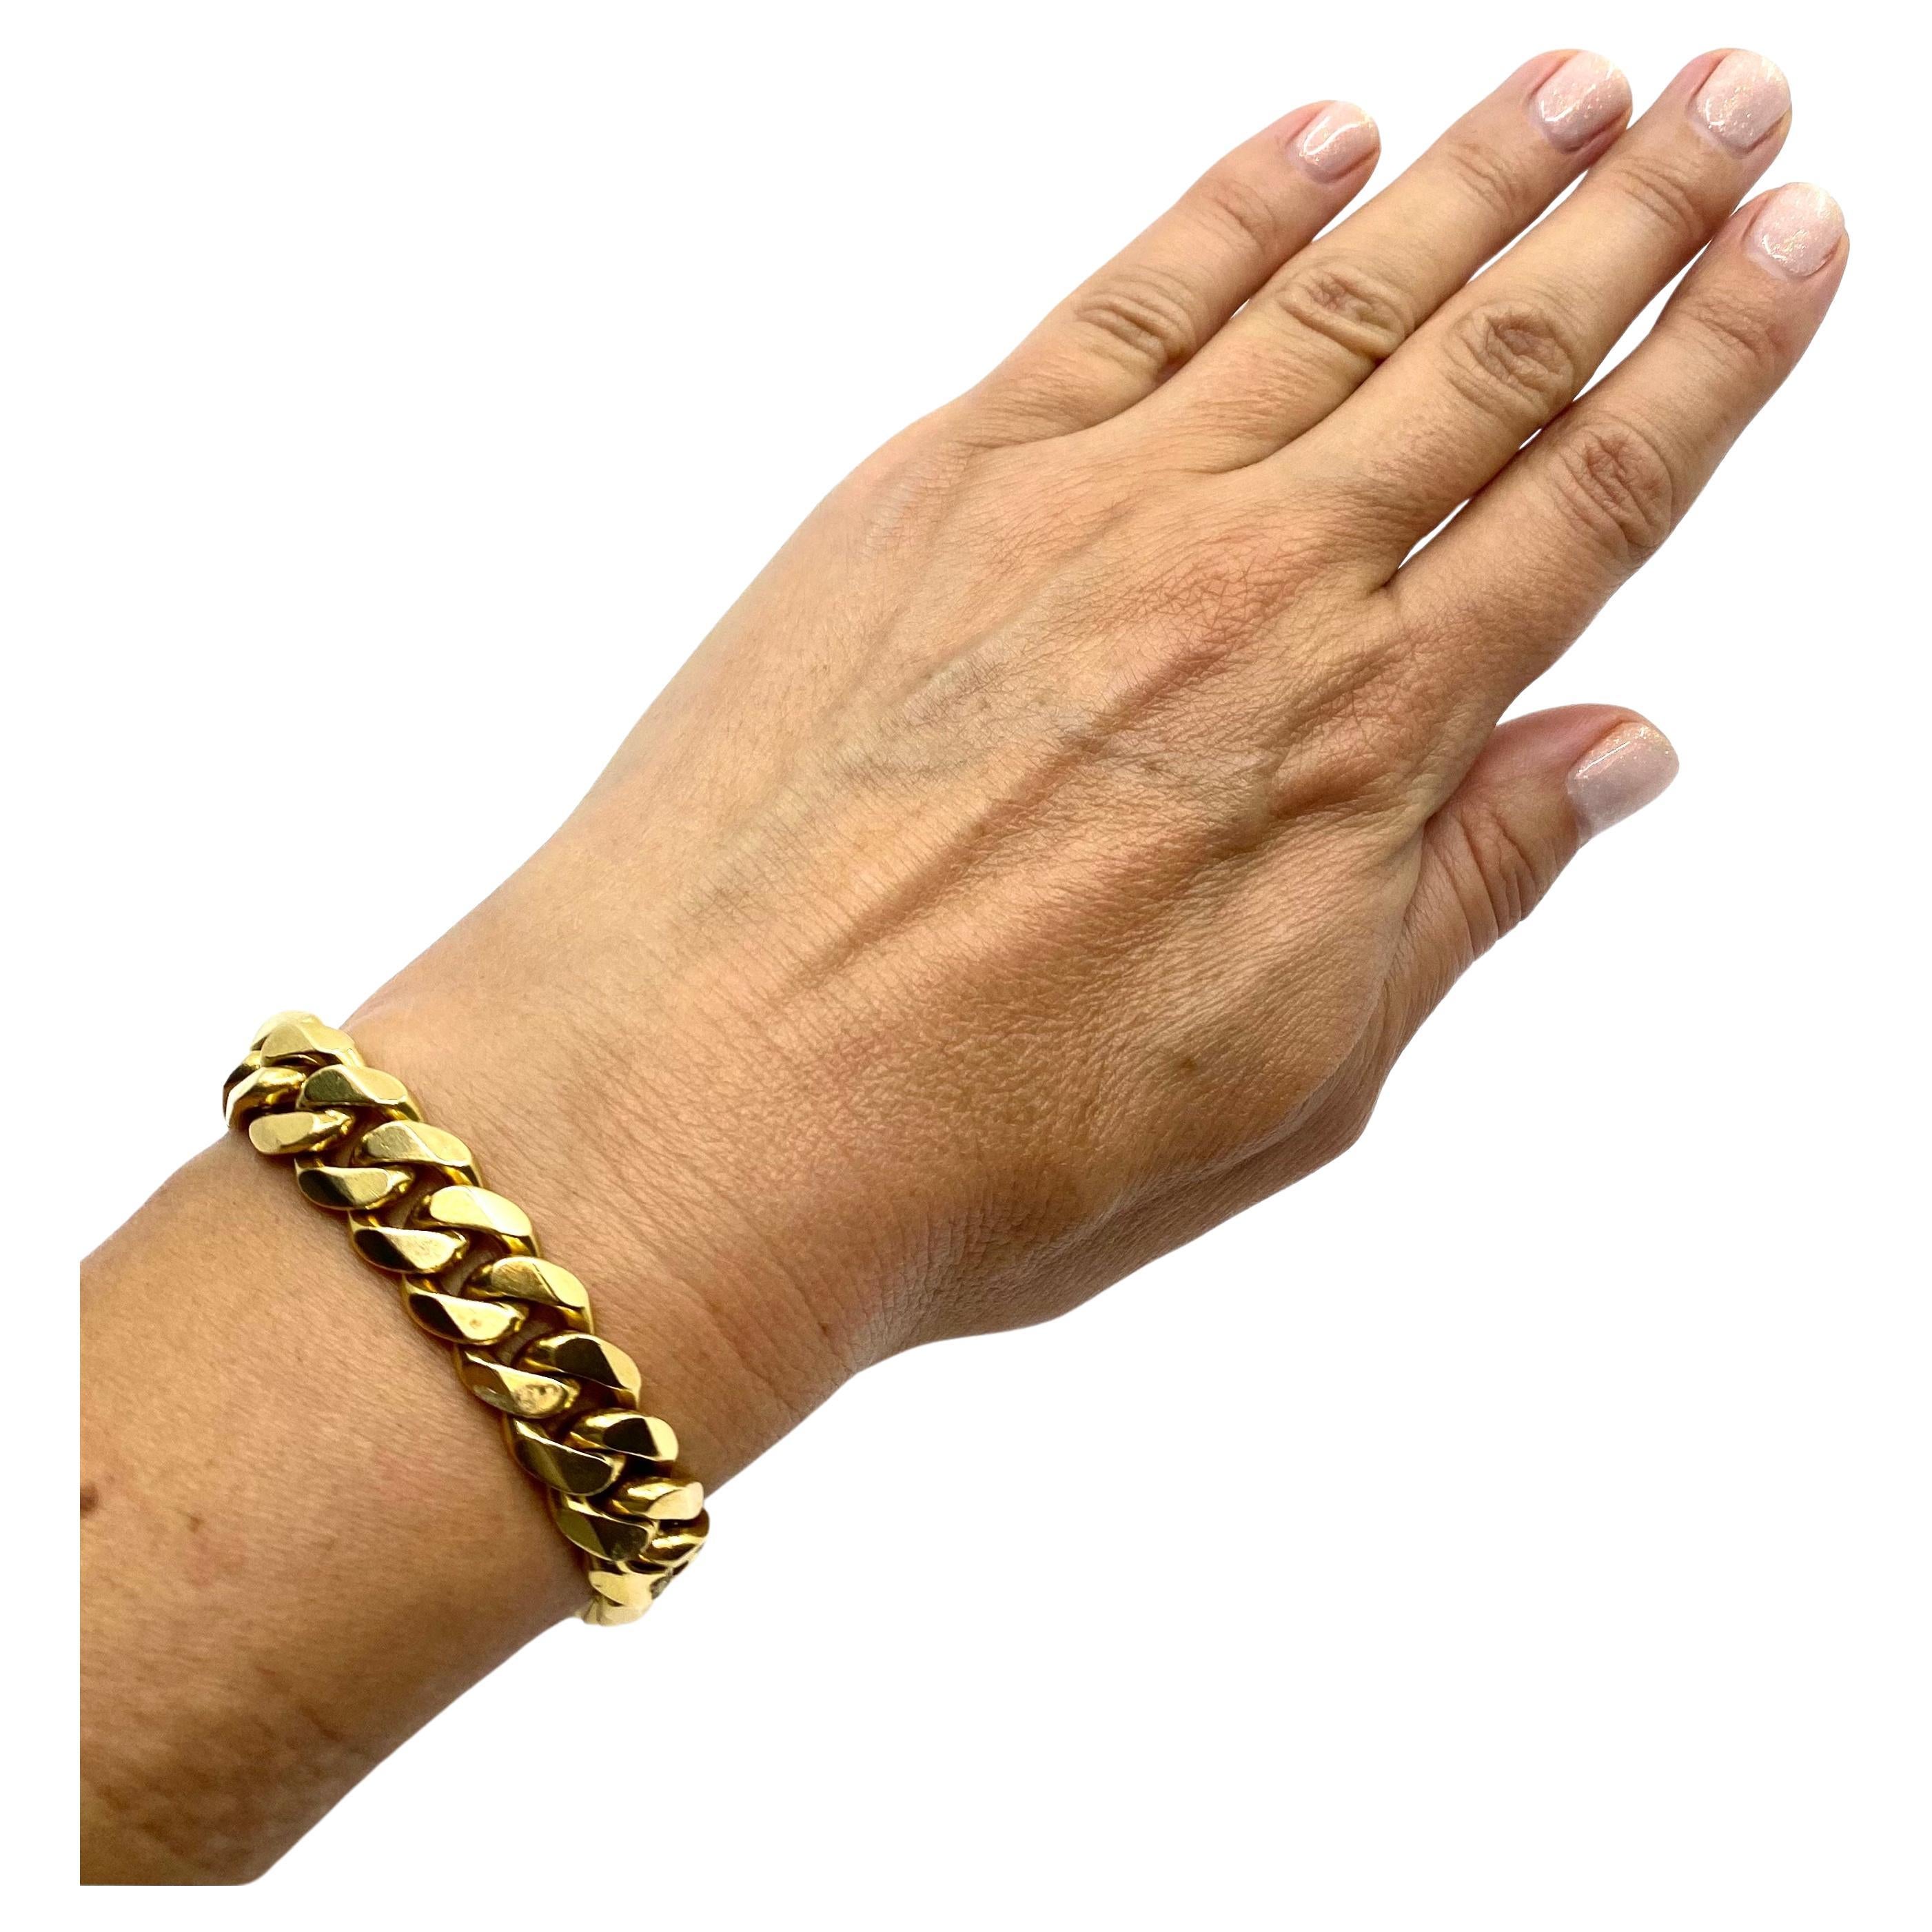 A great vintage Cartier gold bracelet crafted out of a curb link chain. A heavy and flat curb link chain makes a perfect bracelet on its own. But Cartier made a step up and added chamfered edges to the links. It appeared to be a perfect touch for